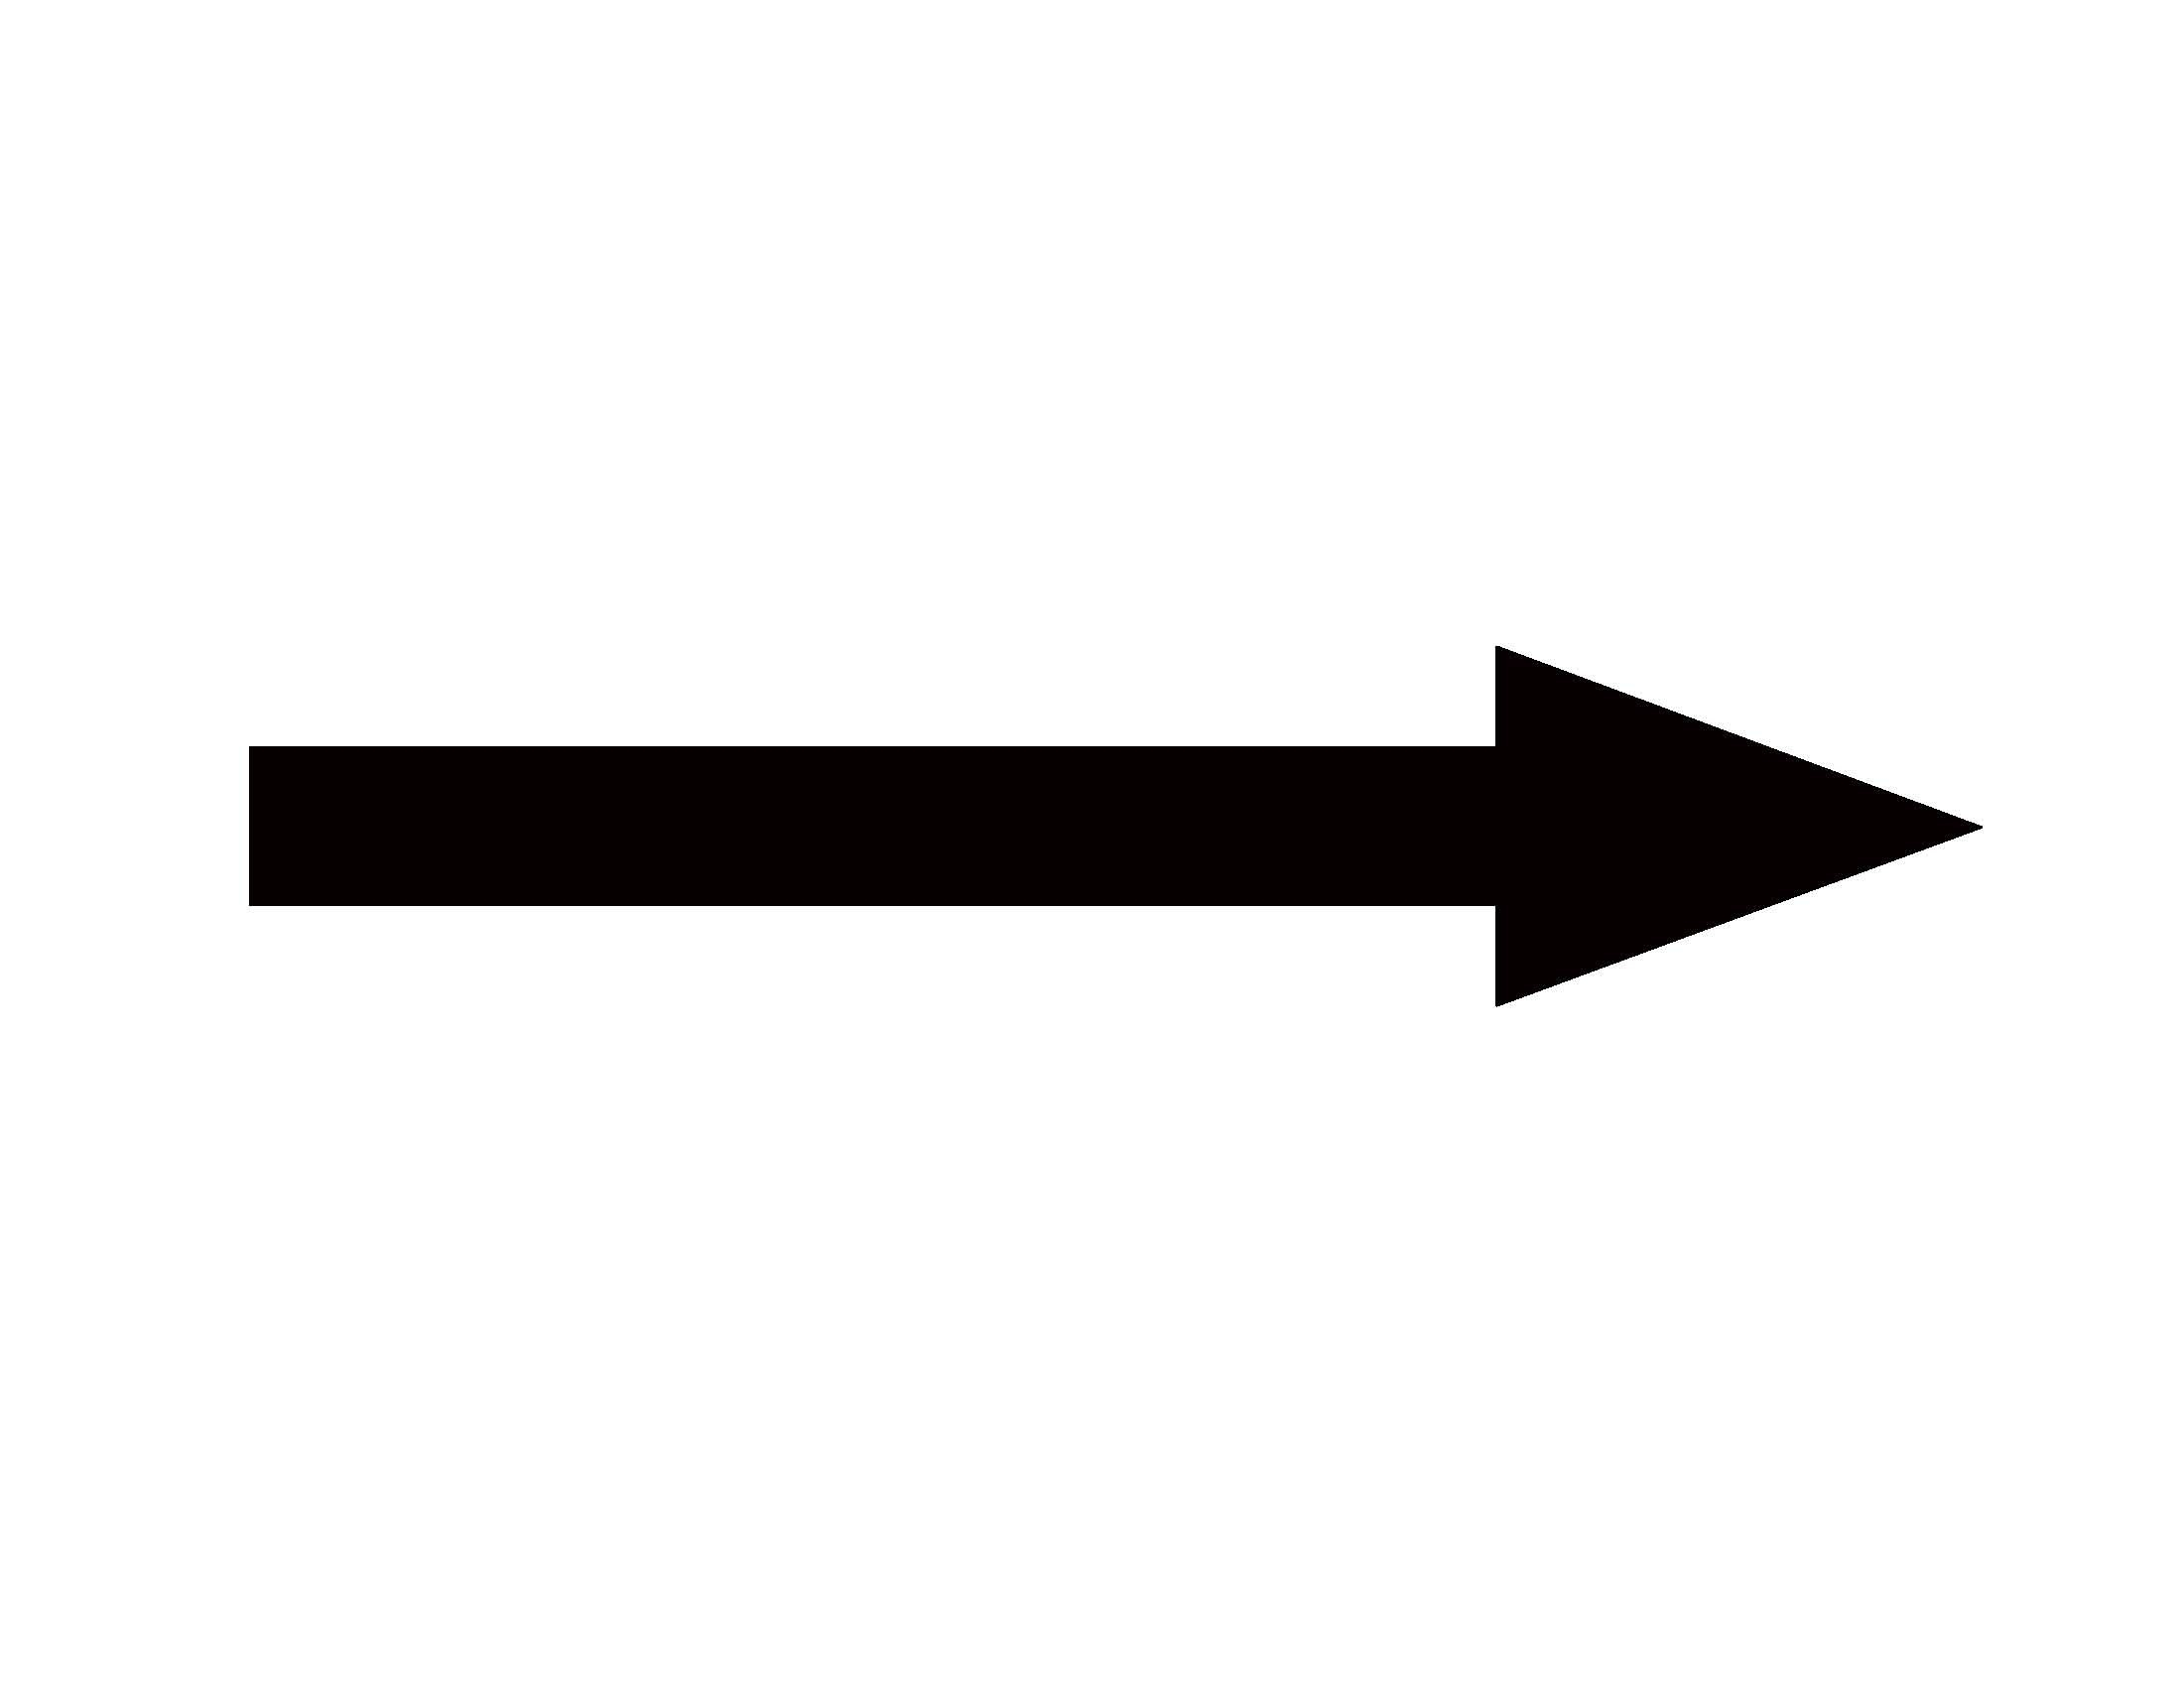 clipart arrow black and white